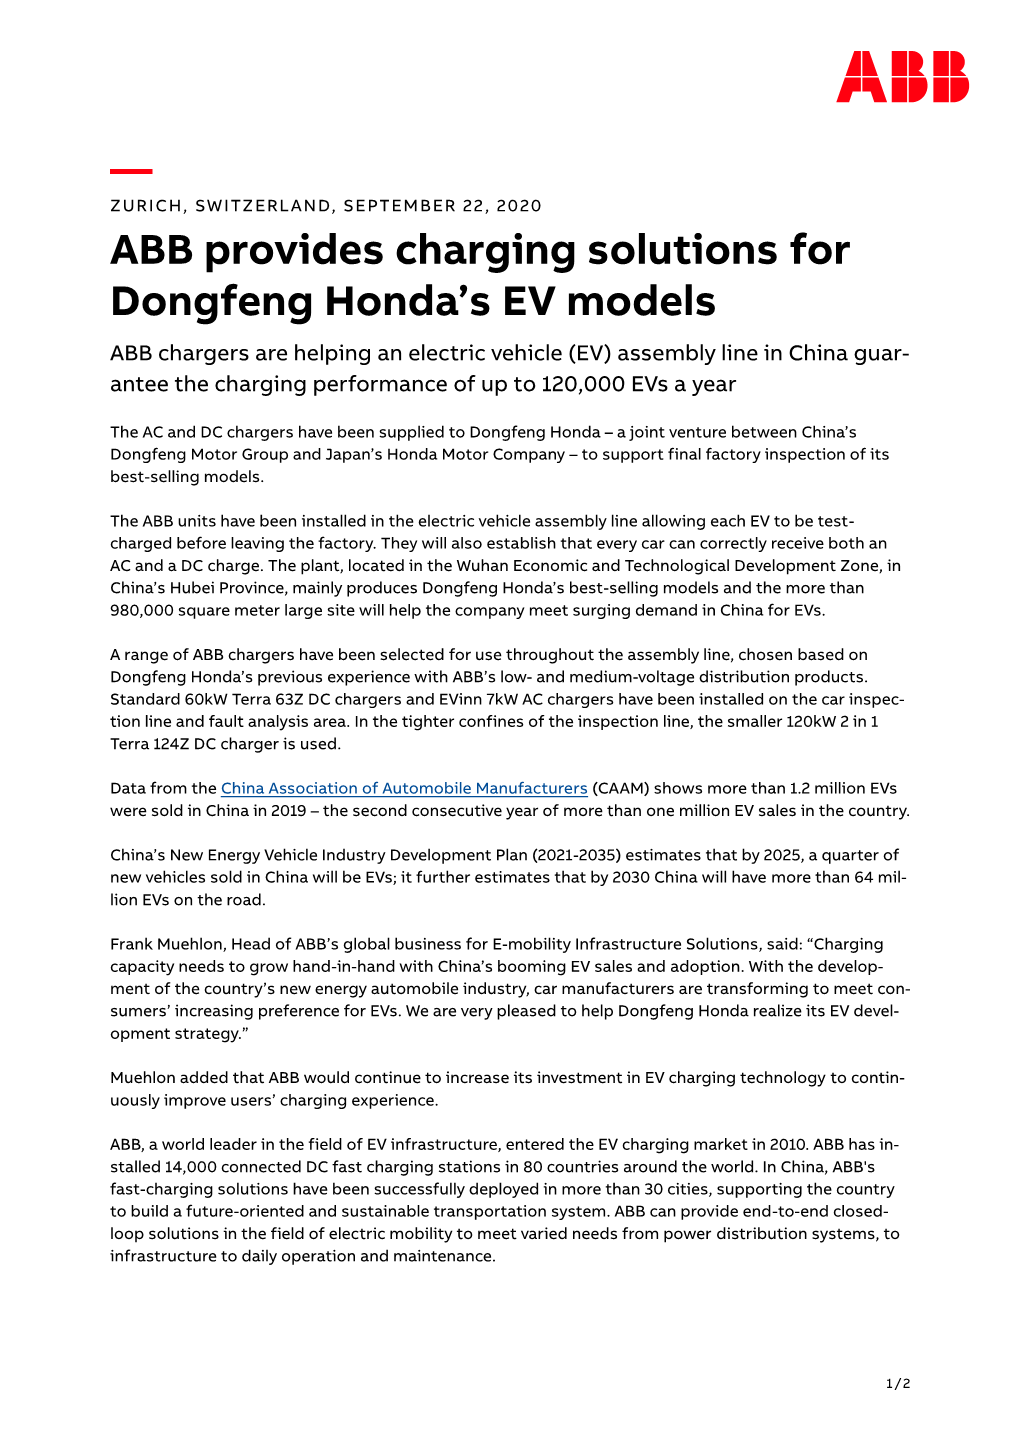 ABB Provides Charging Solutions for Dongfeng Honda's EV Models